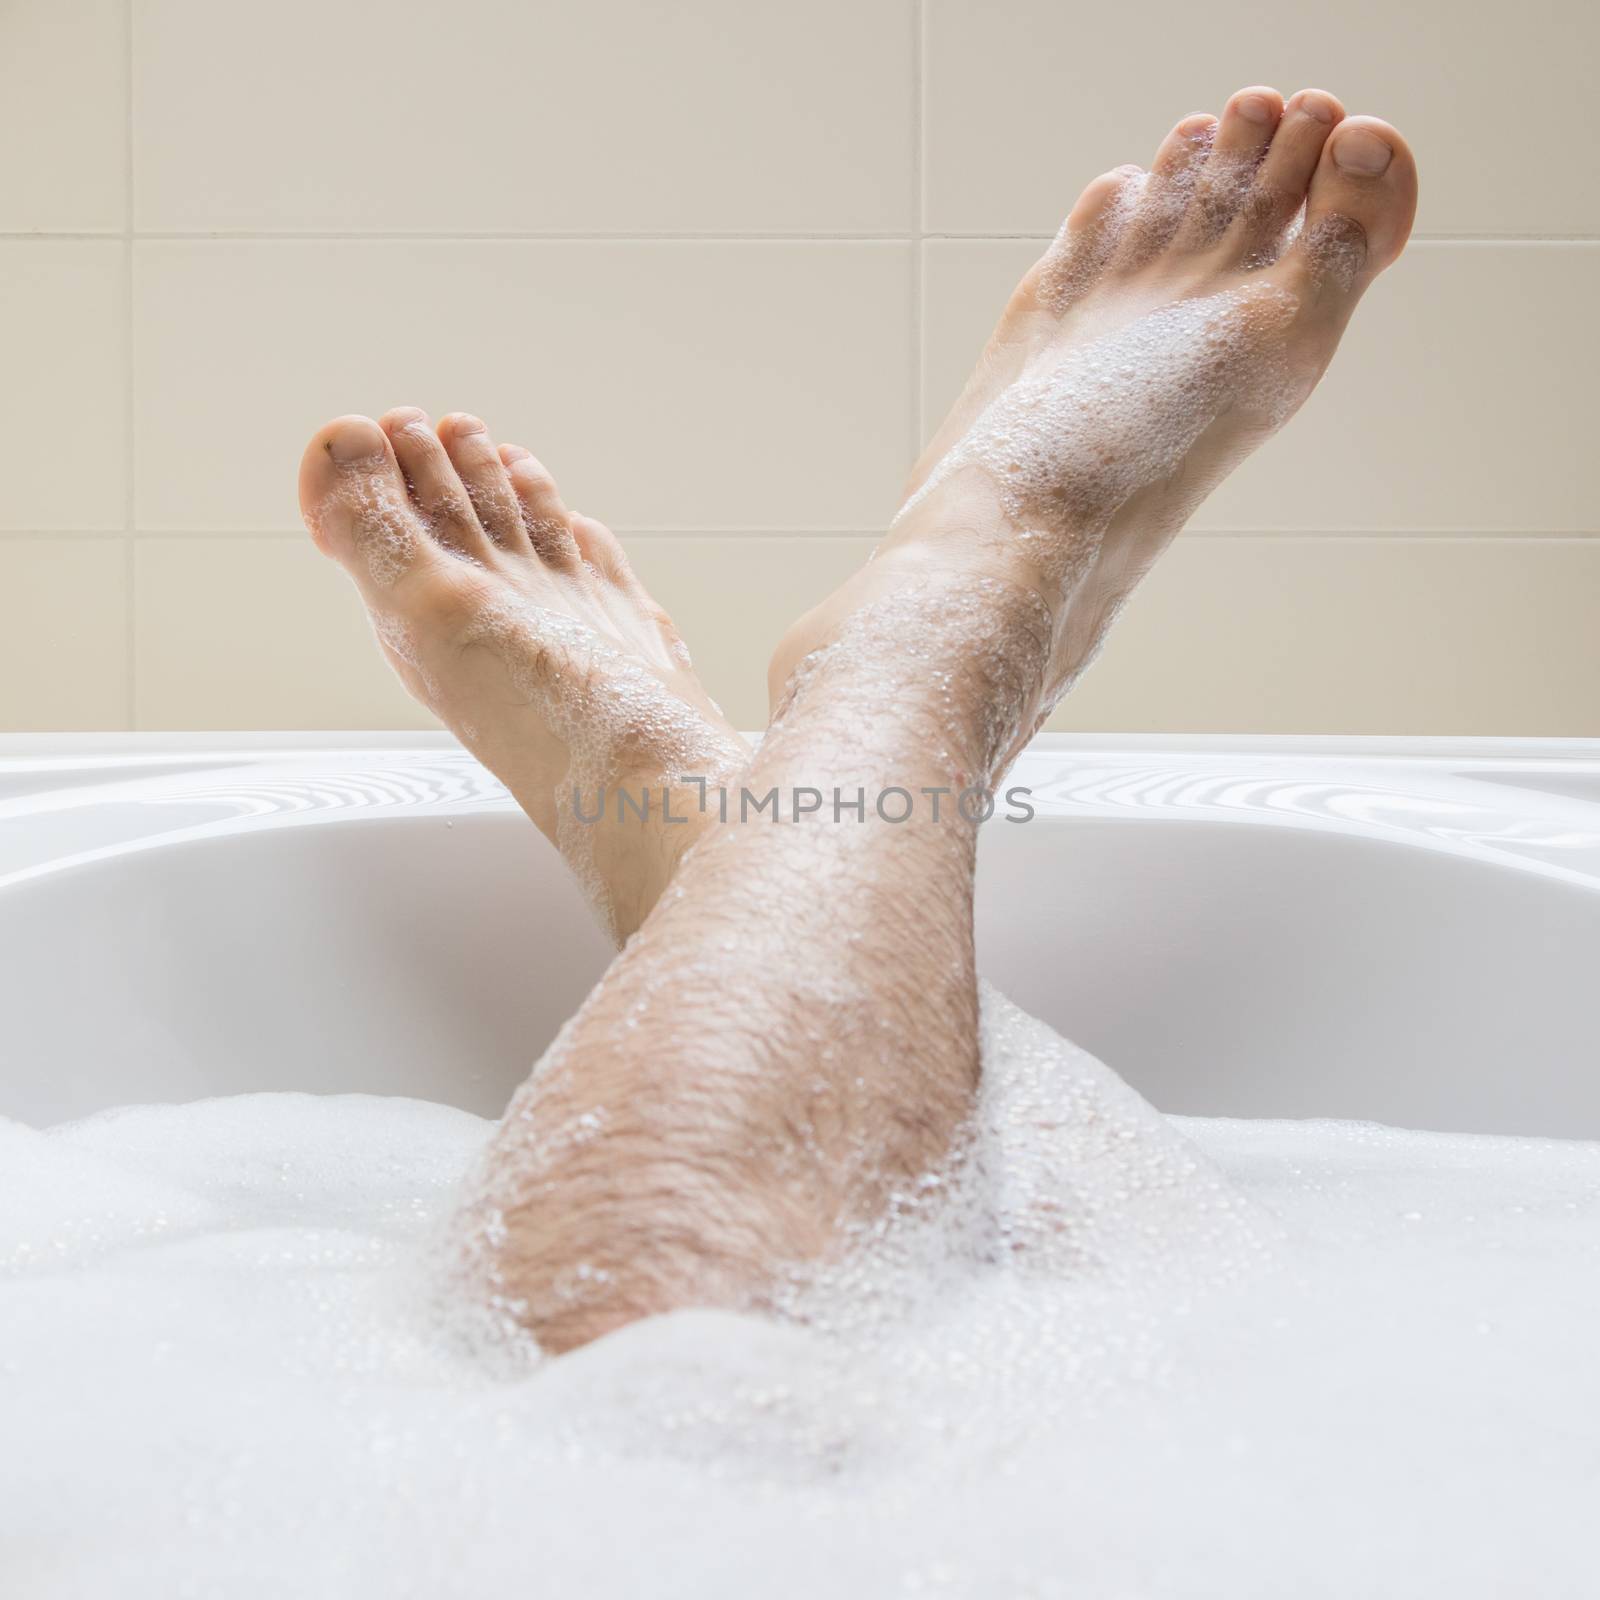 Men's feet in a bathtub, selective focus on toes by michaklootwijk